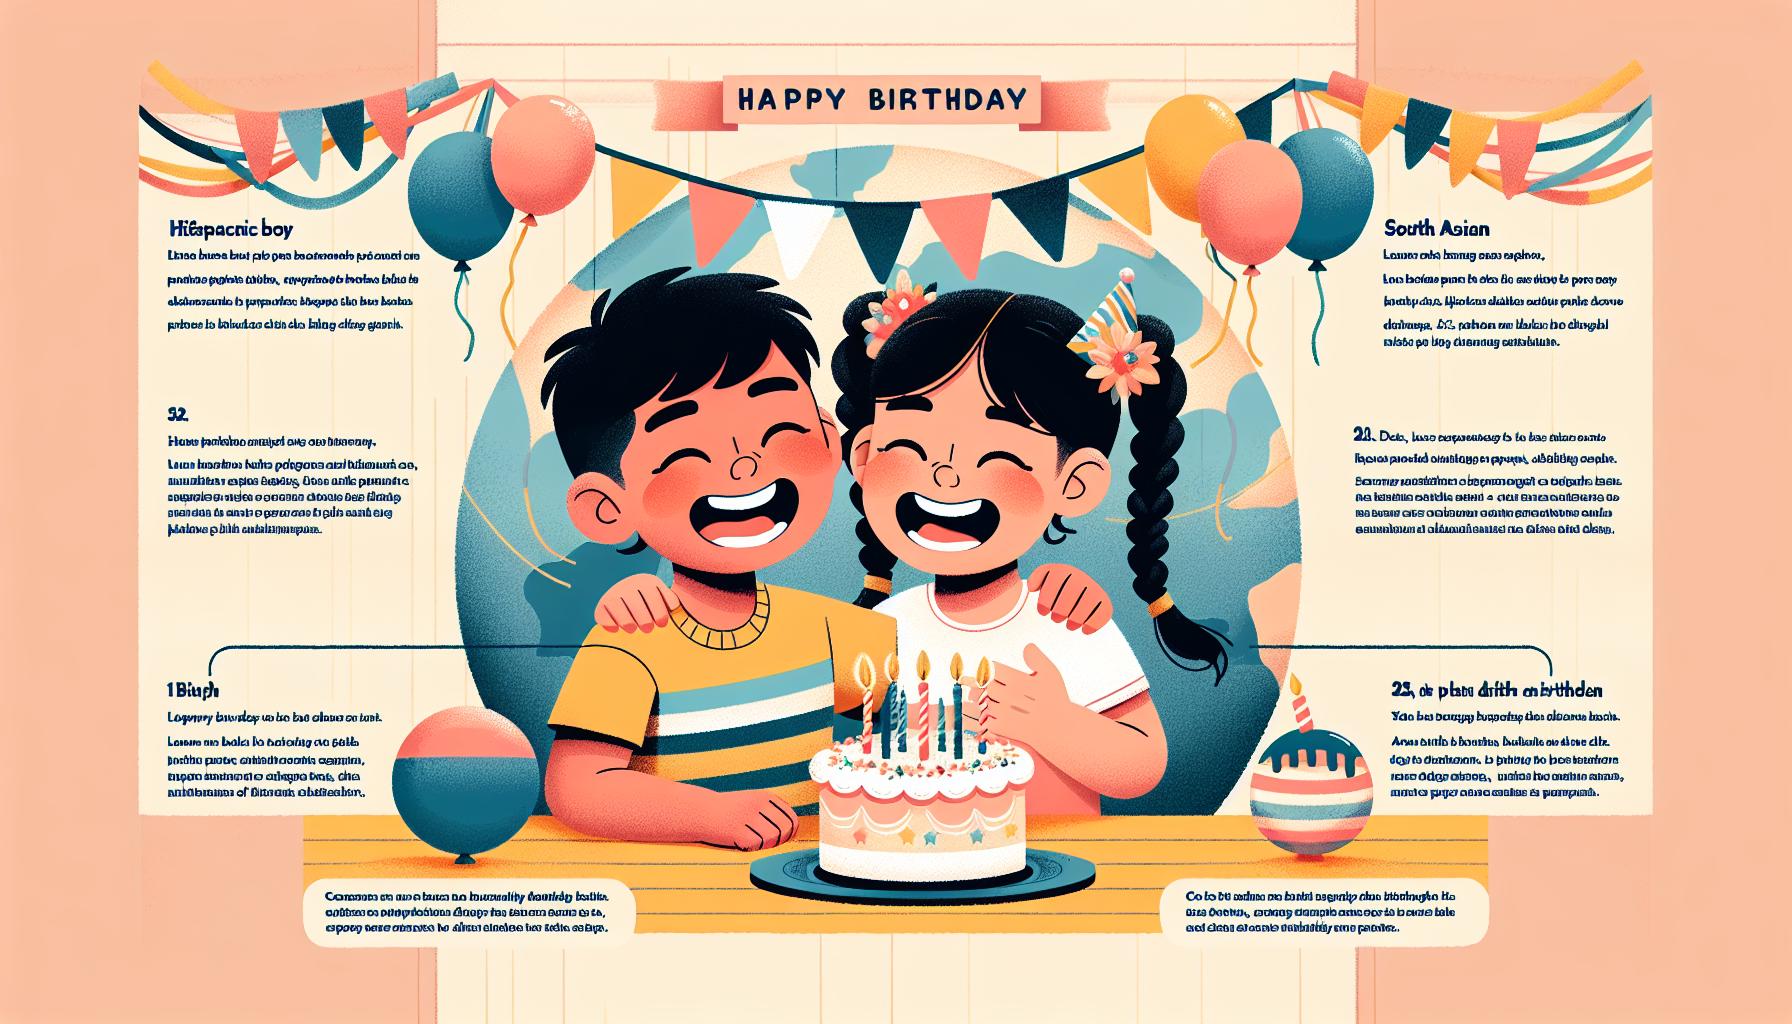 Creating Hilarious Birthday Wishes for Your Big Brother: A Guide